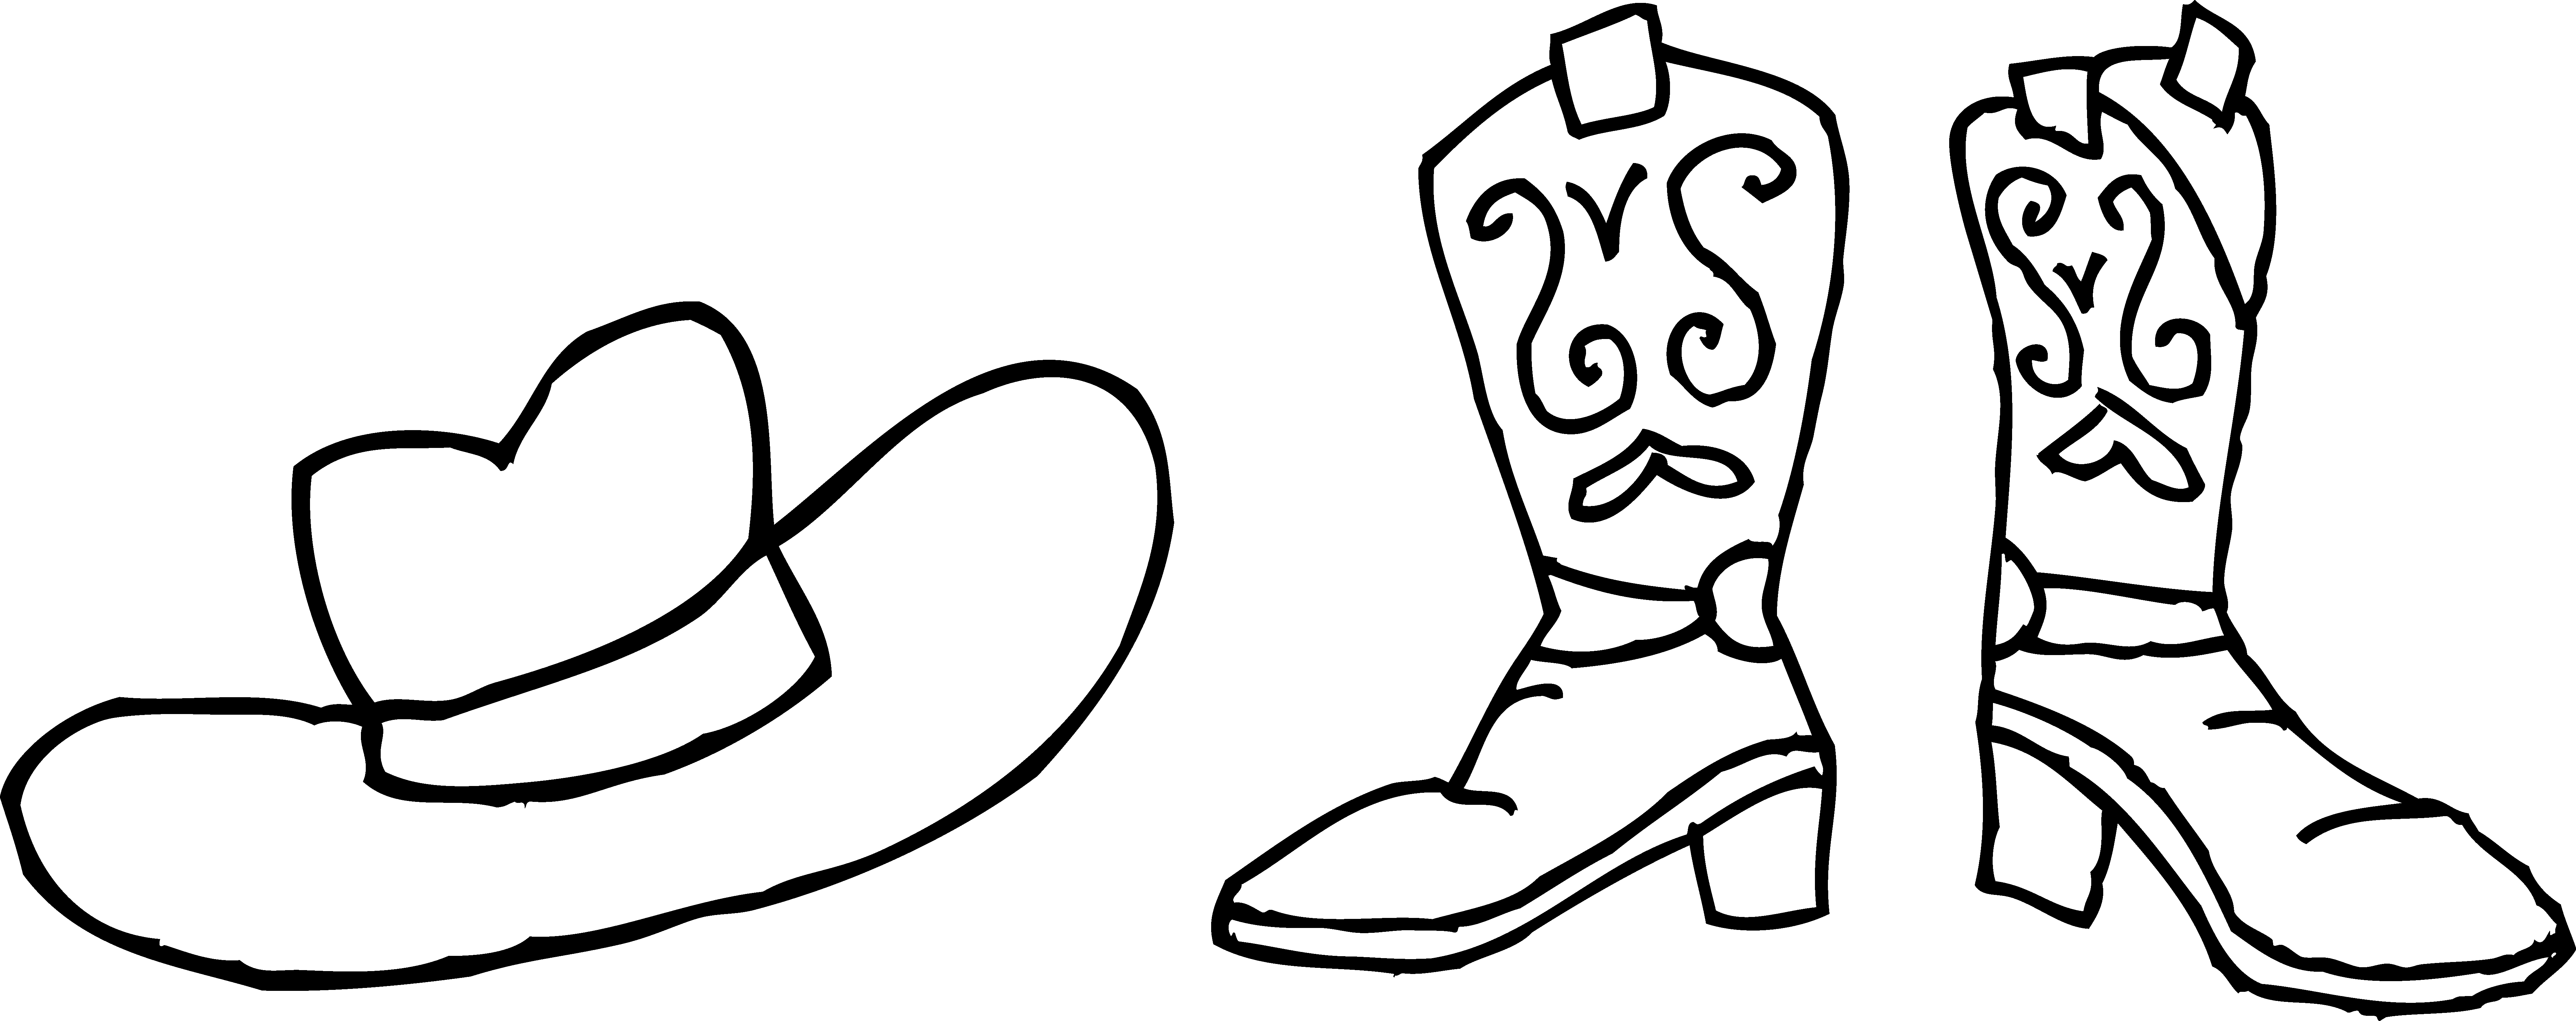 Colorable Cowboy Hat and Boots - Free Clip Art